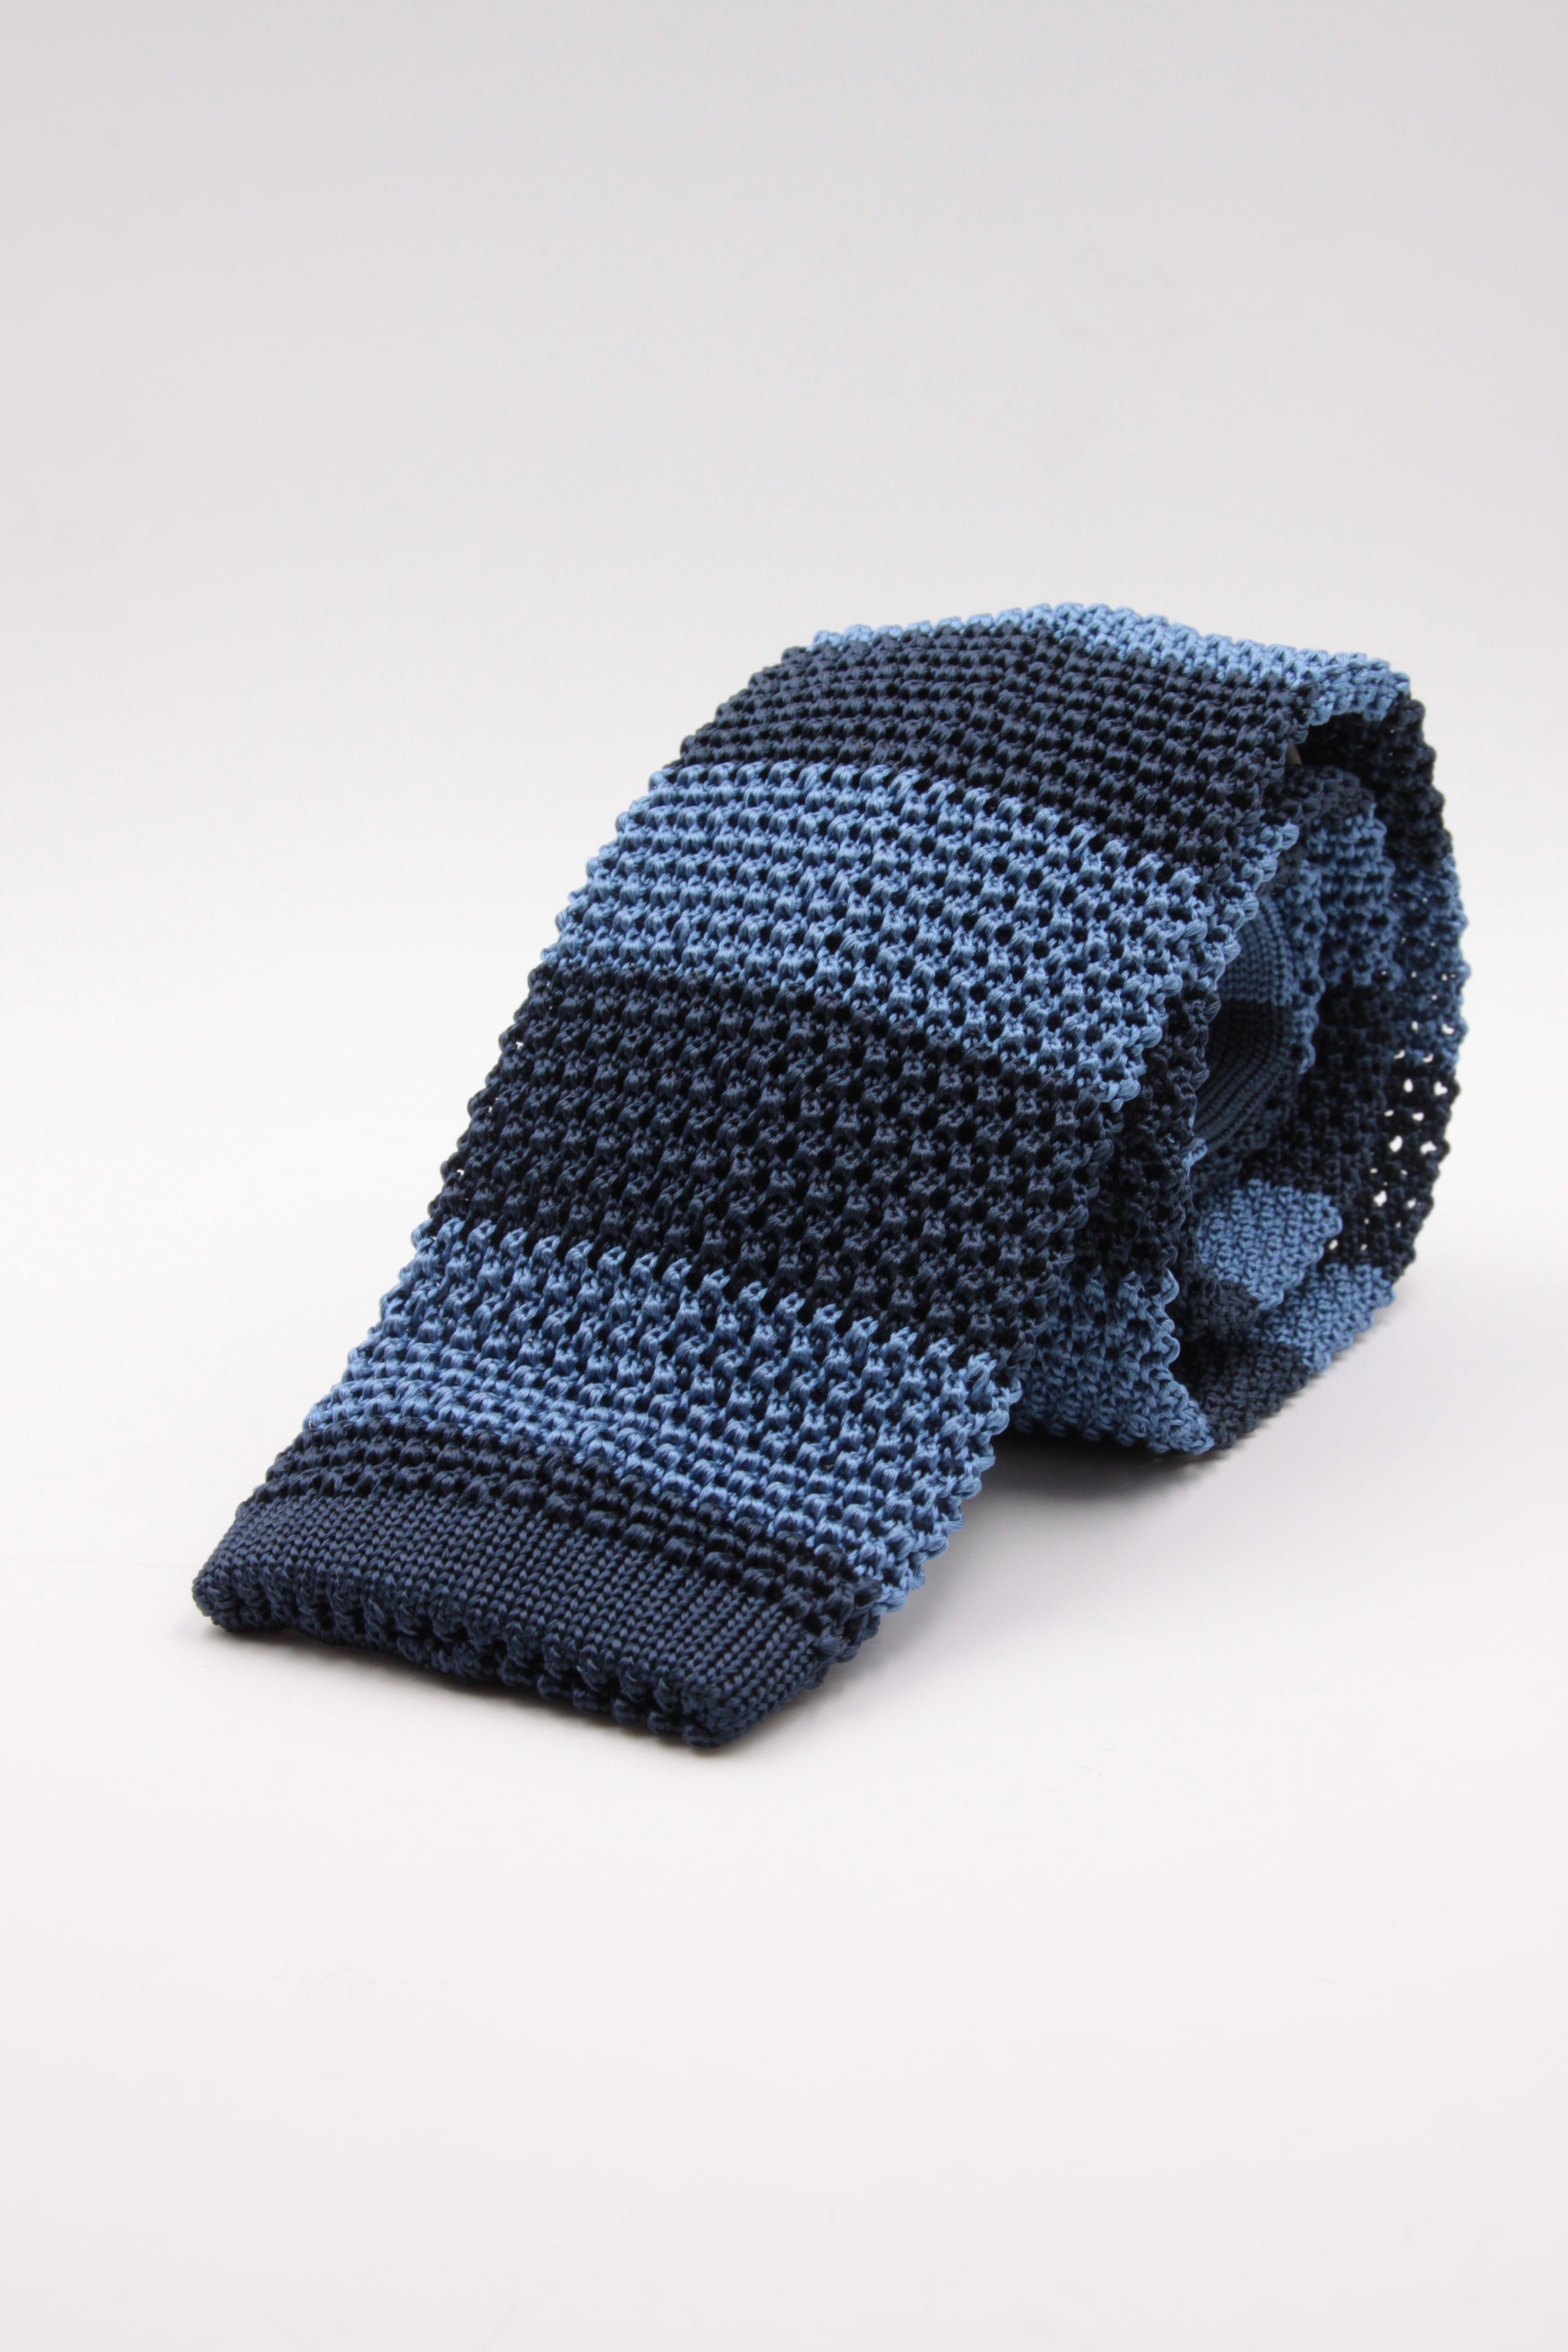 Blue navy and light blue stripe knitted tie